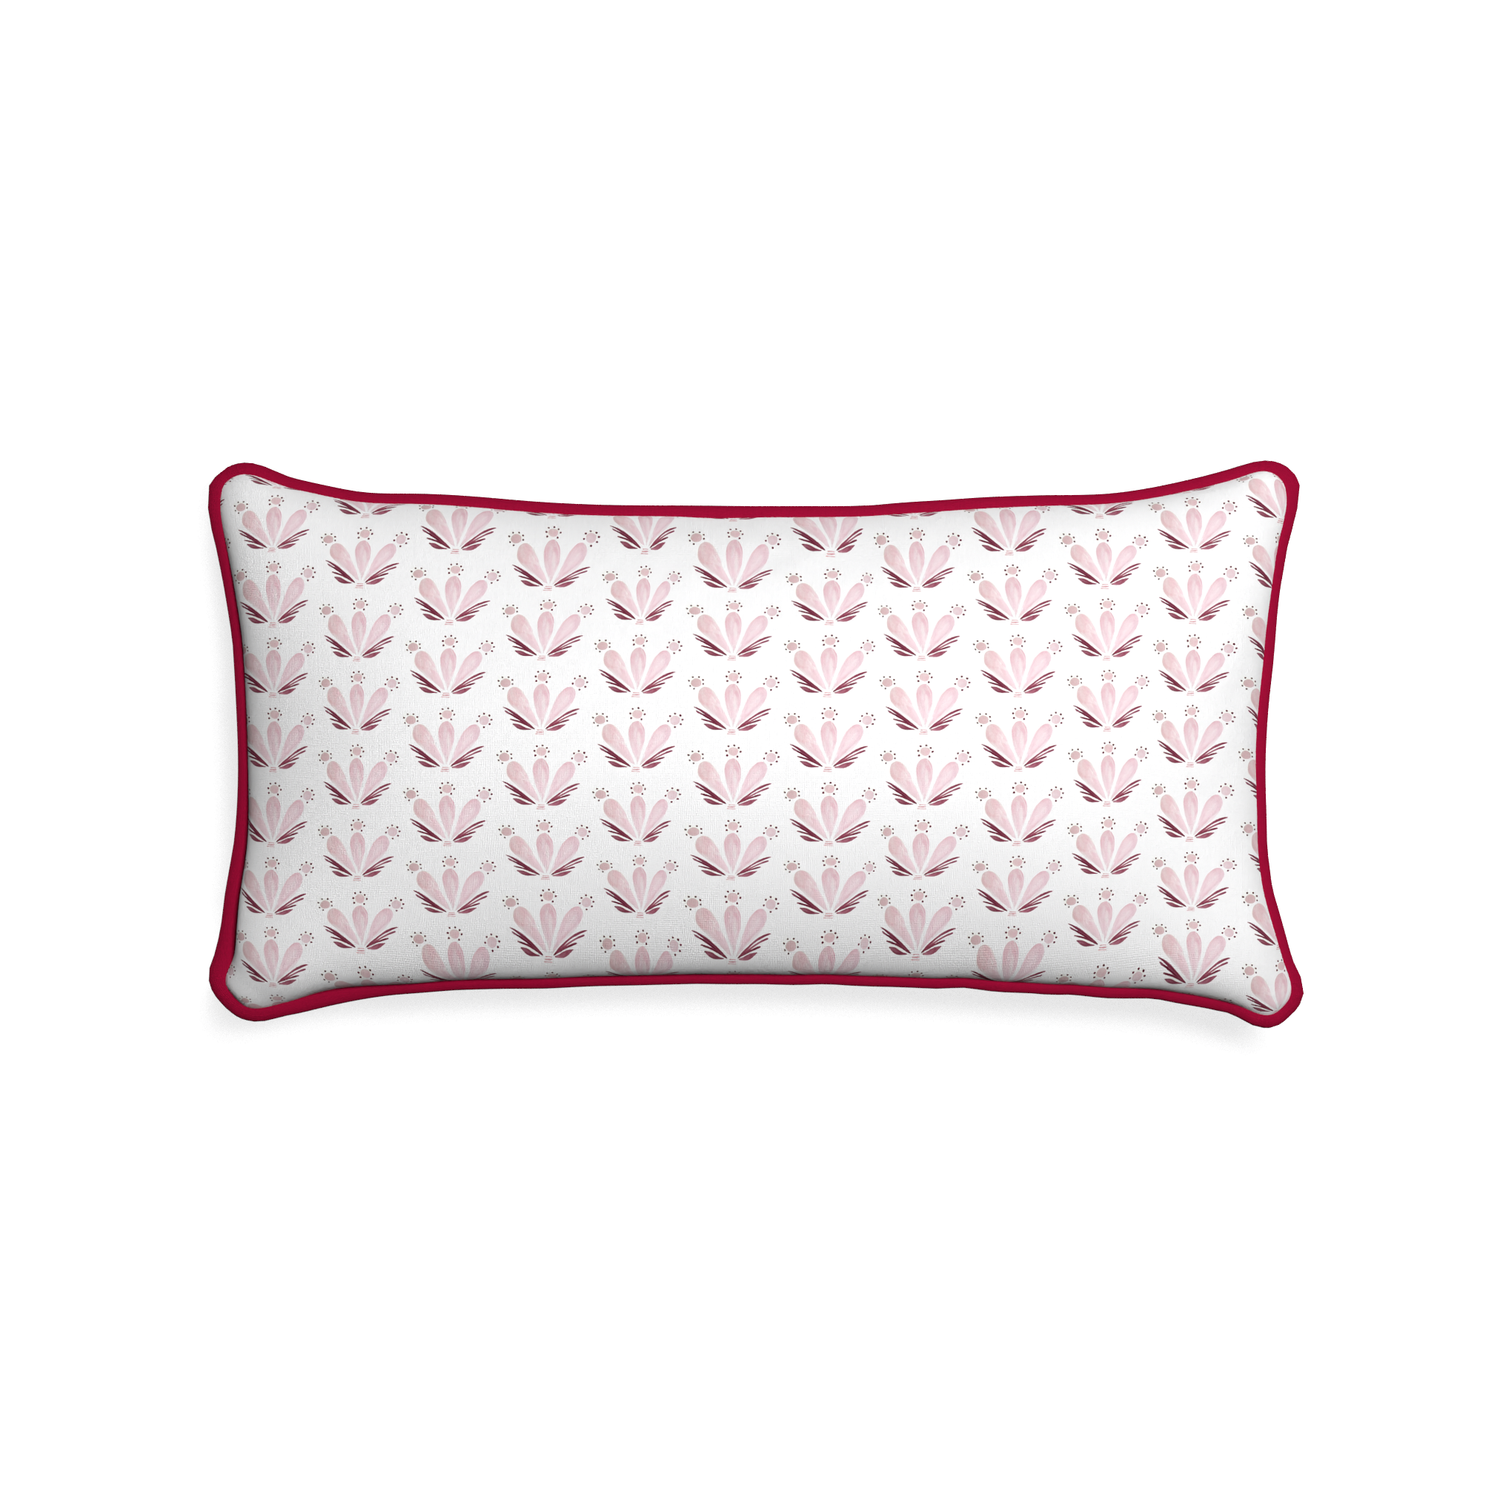 Midi-lumbar serena pink custom pink & burgundy drop repeat floralpillow with raspberry piping on white background